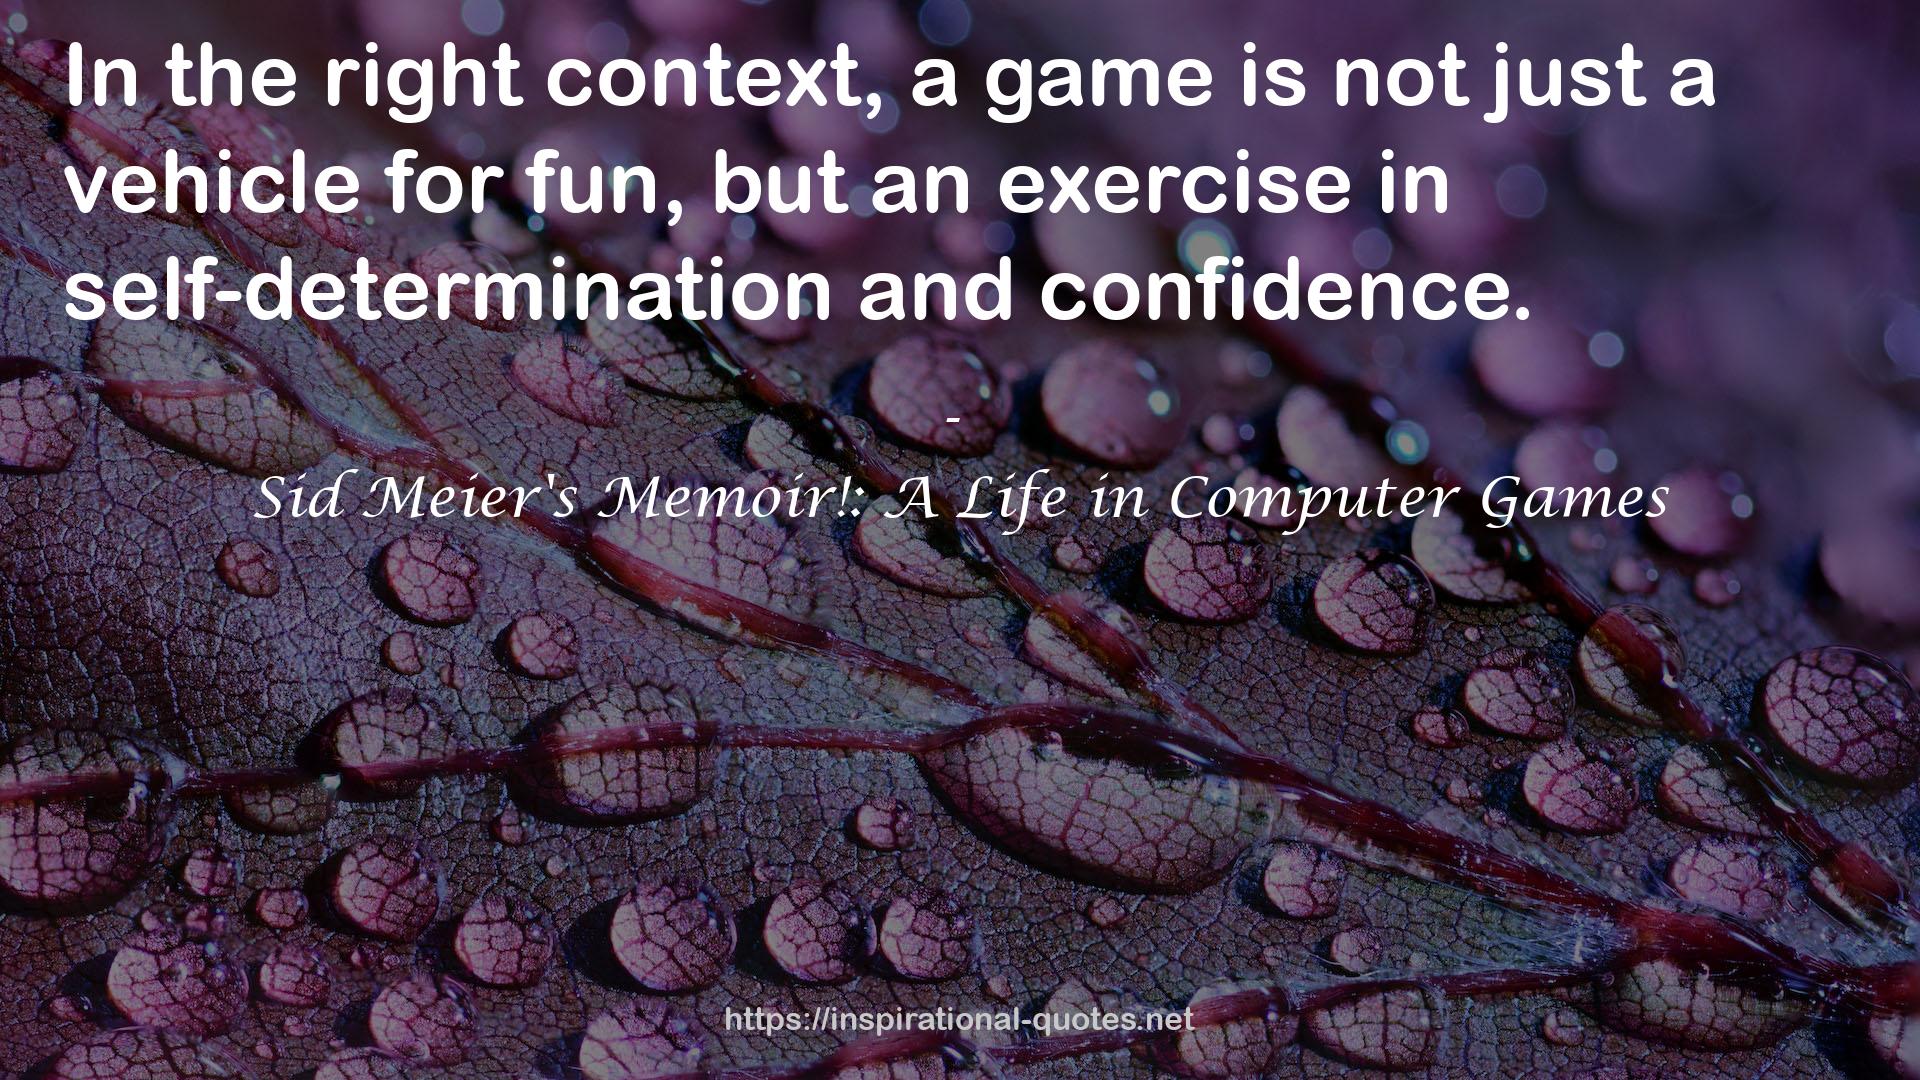 Sid Meier's Memoir!: A Life in Computer Games QUOTES